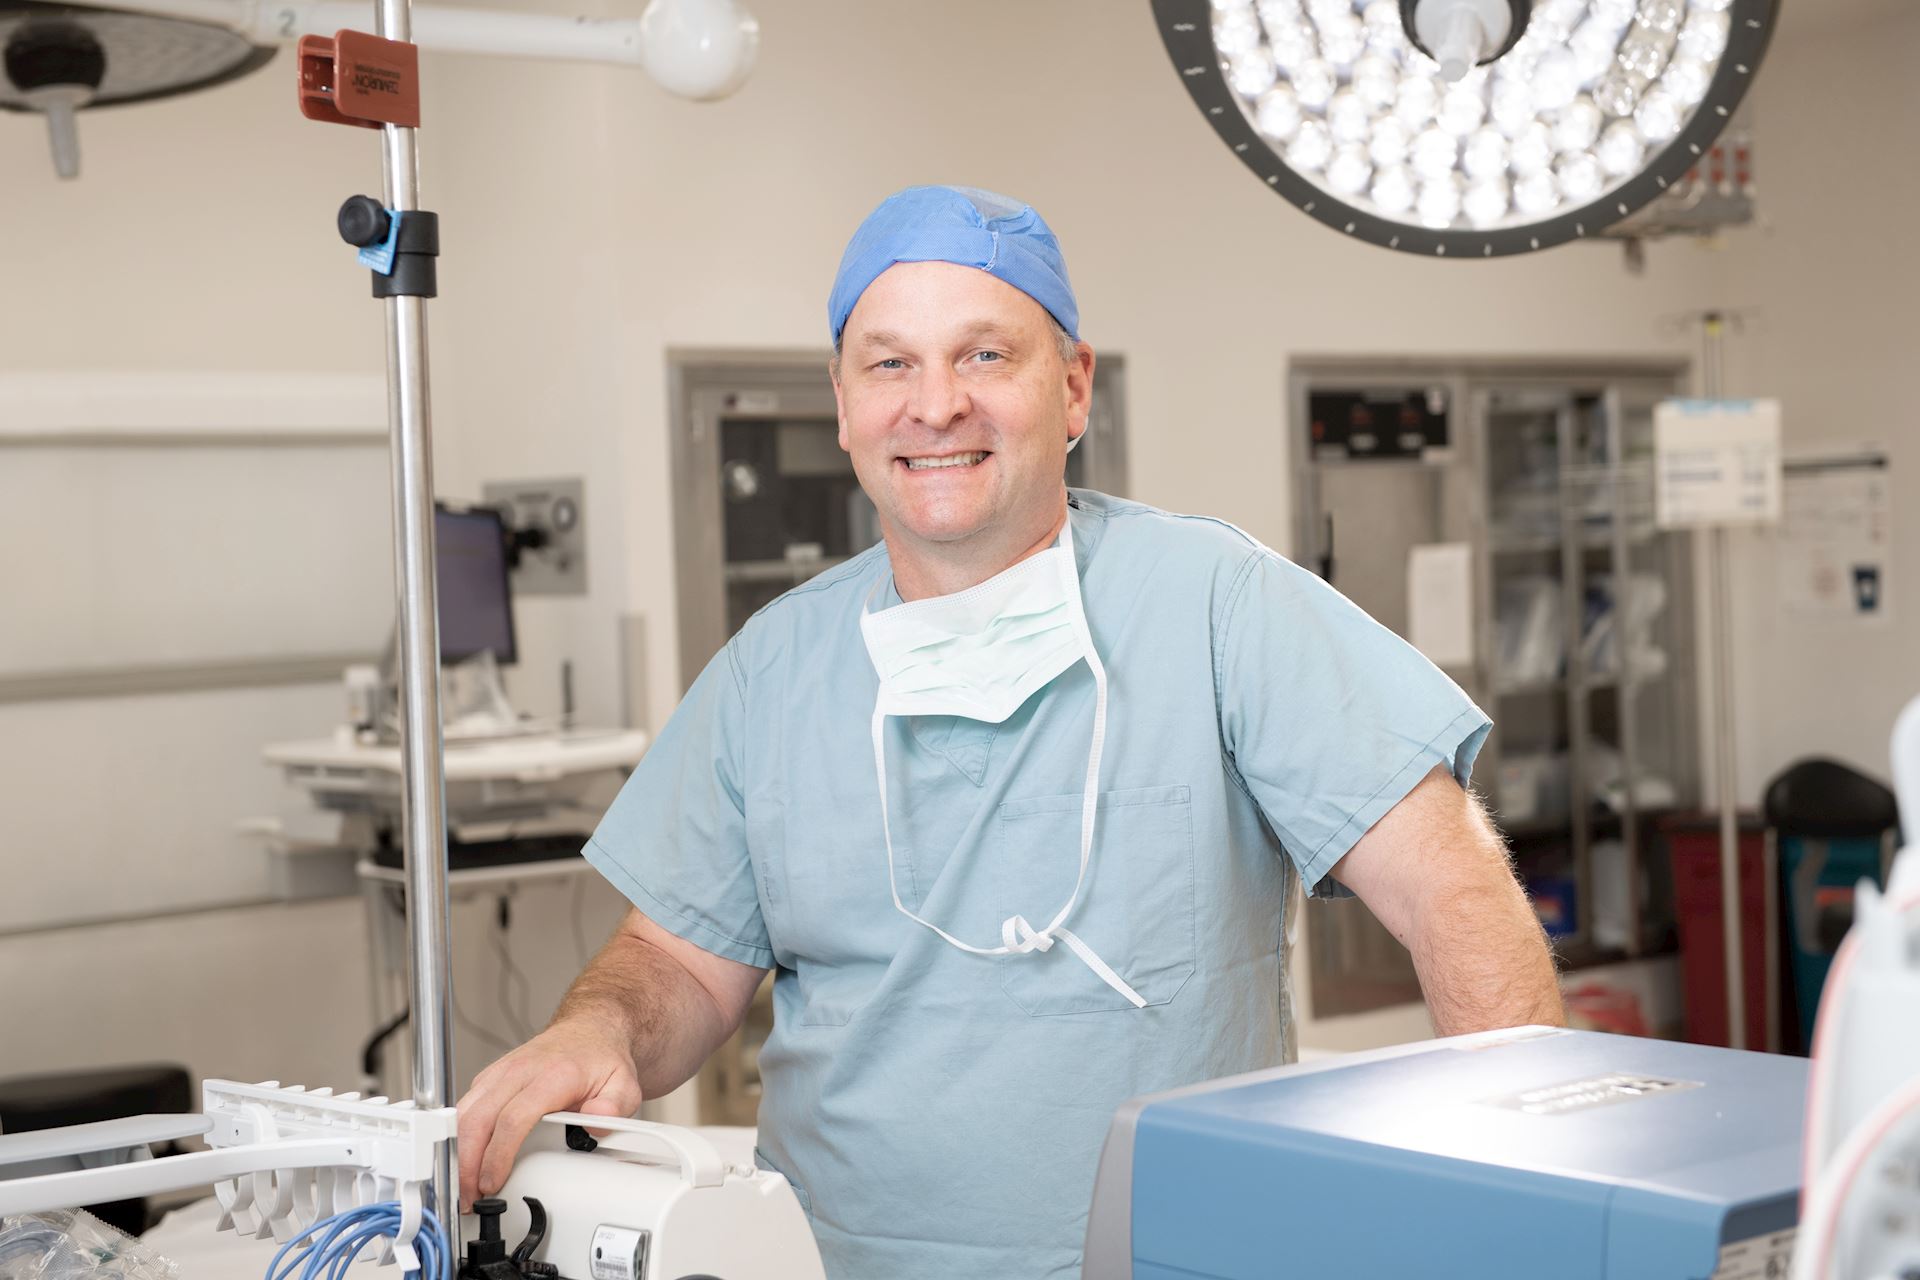 General surgeon smiling in operating room surrounded by medical equipment